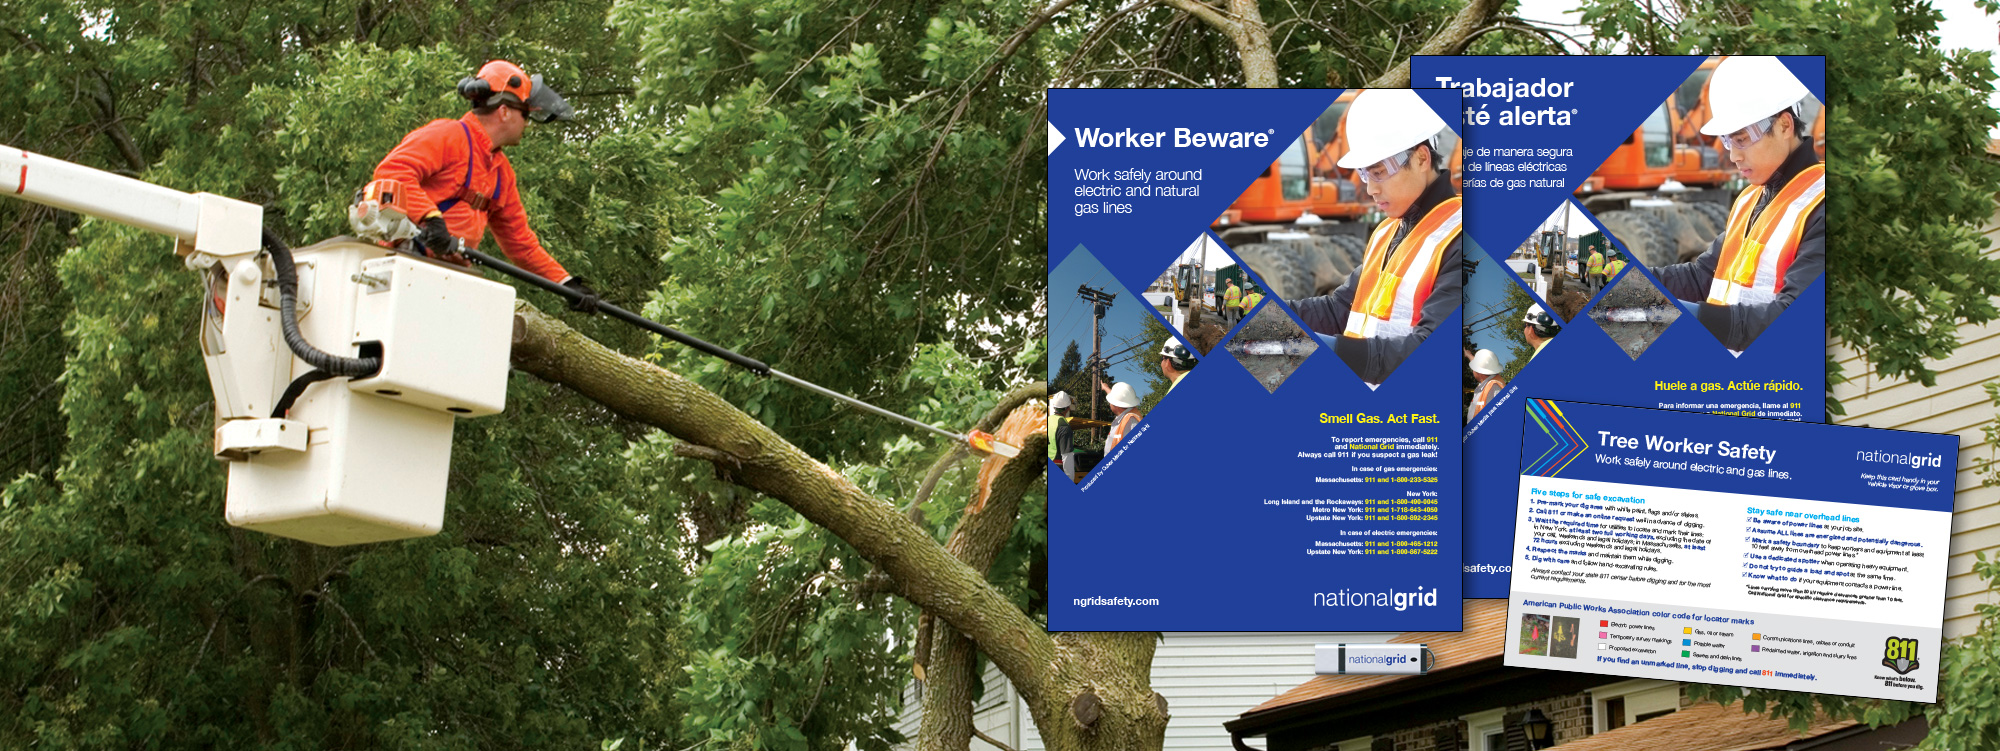 Order tree worker safety training materials